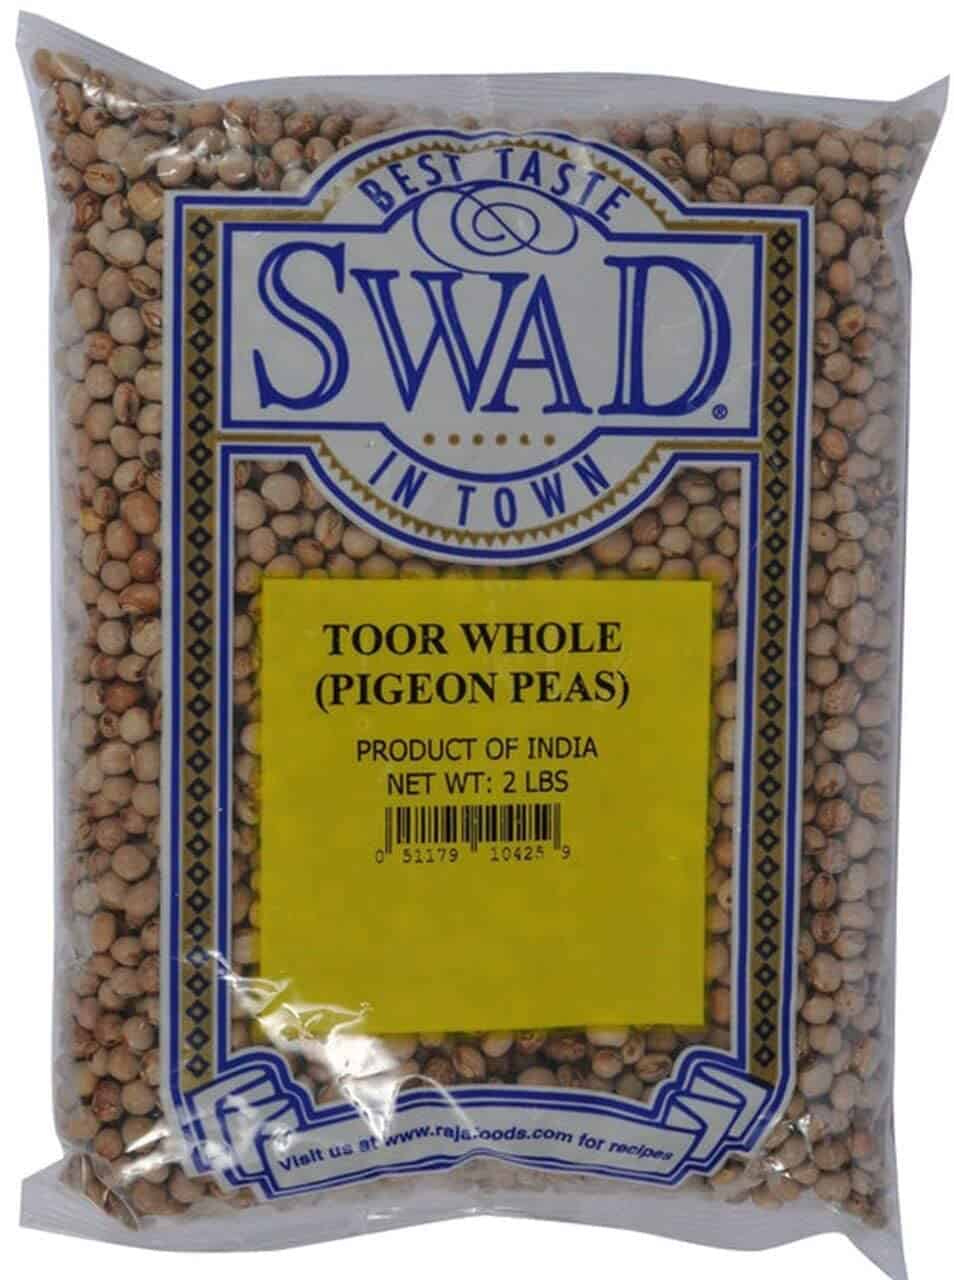 Swad Toor pigeon peas as a substitute for mung beans